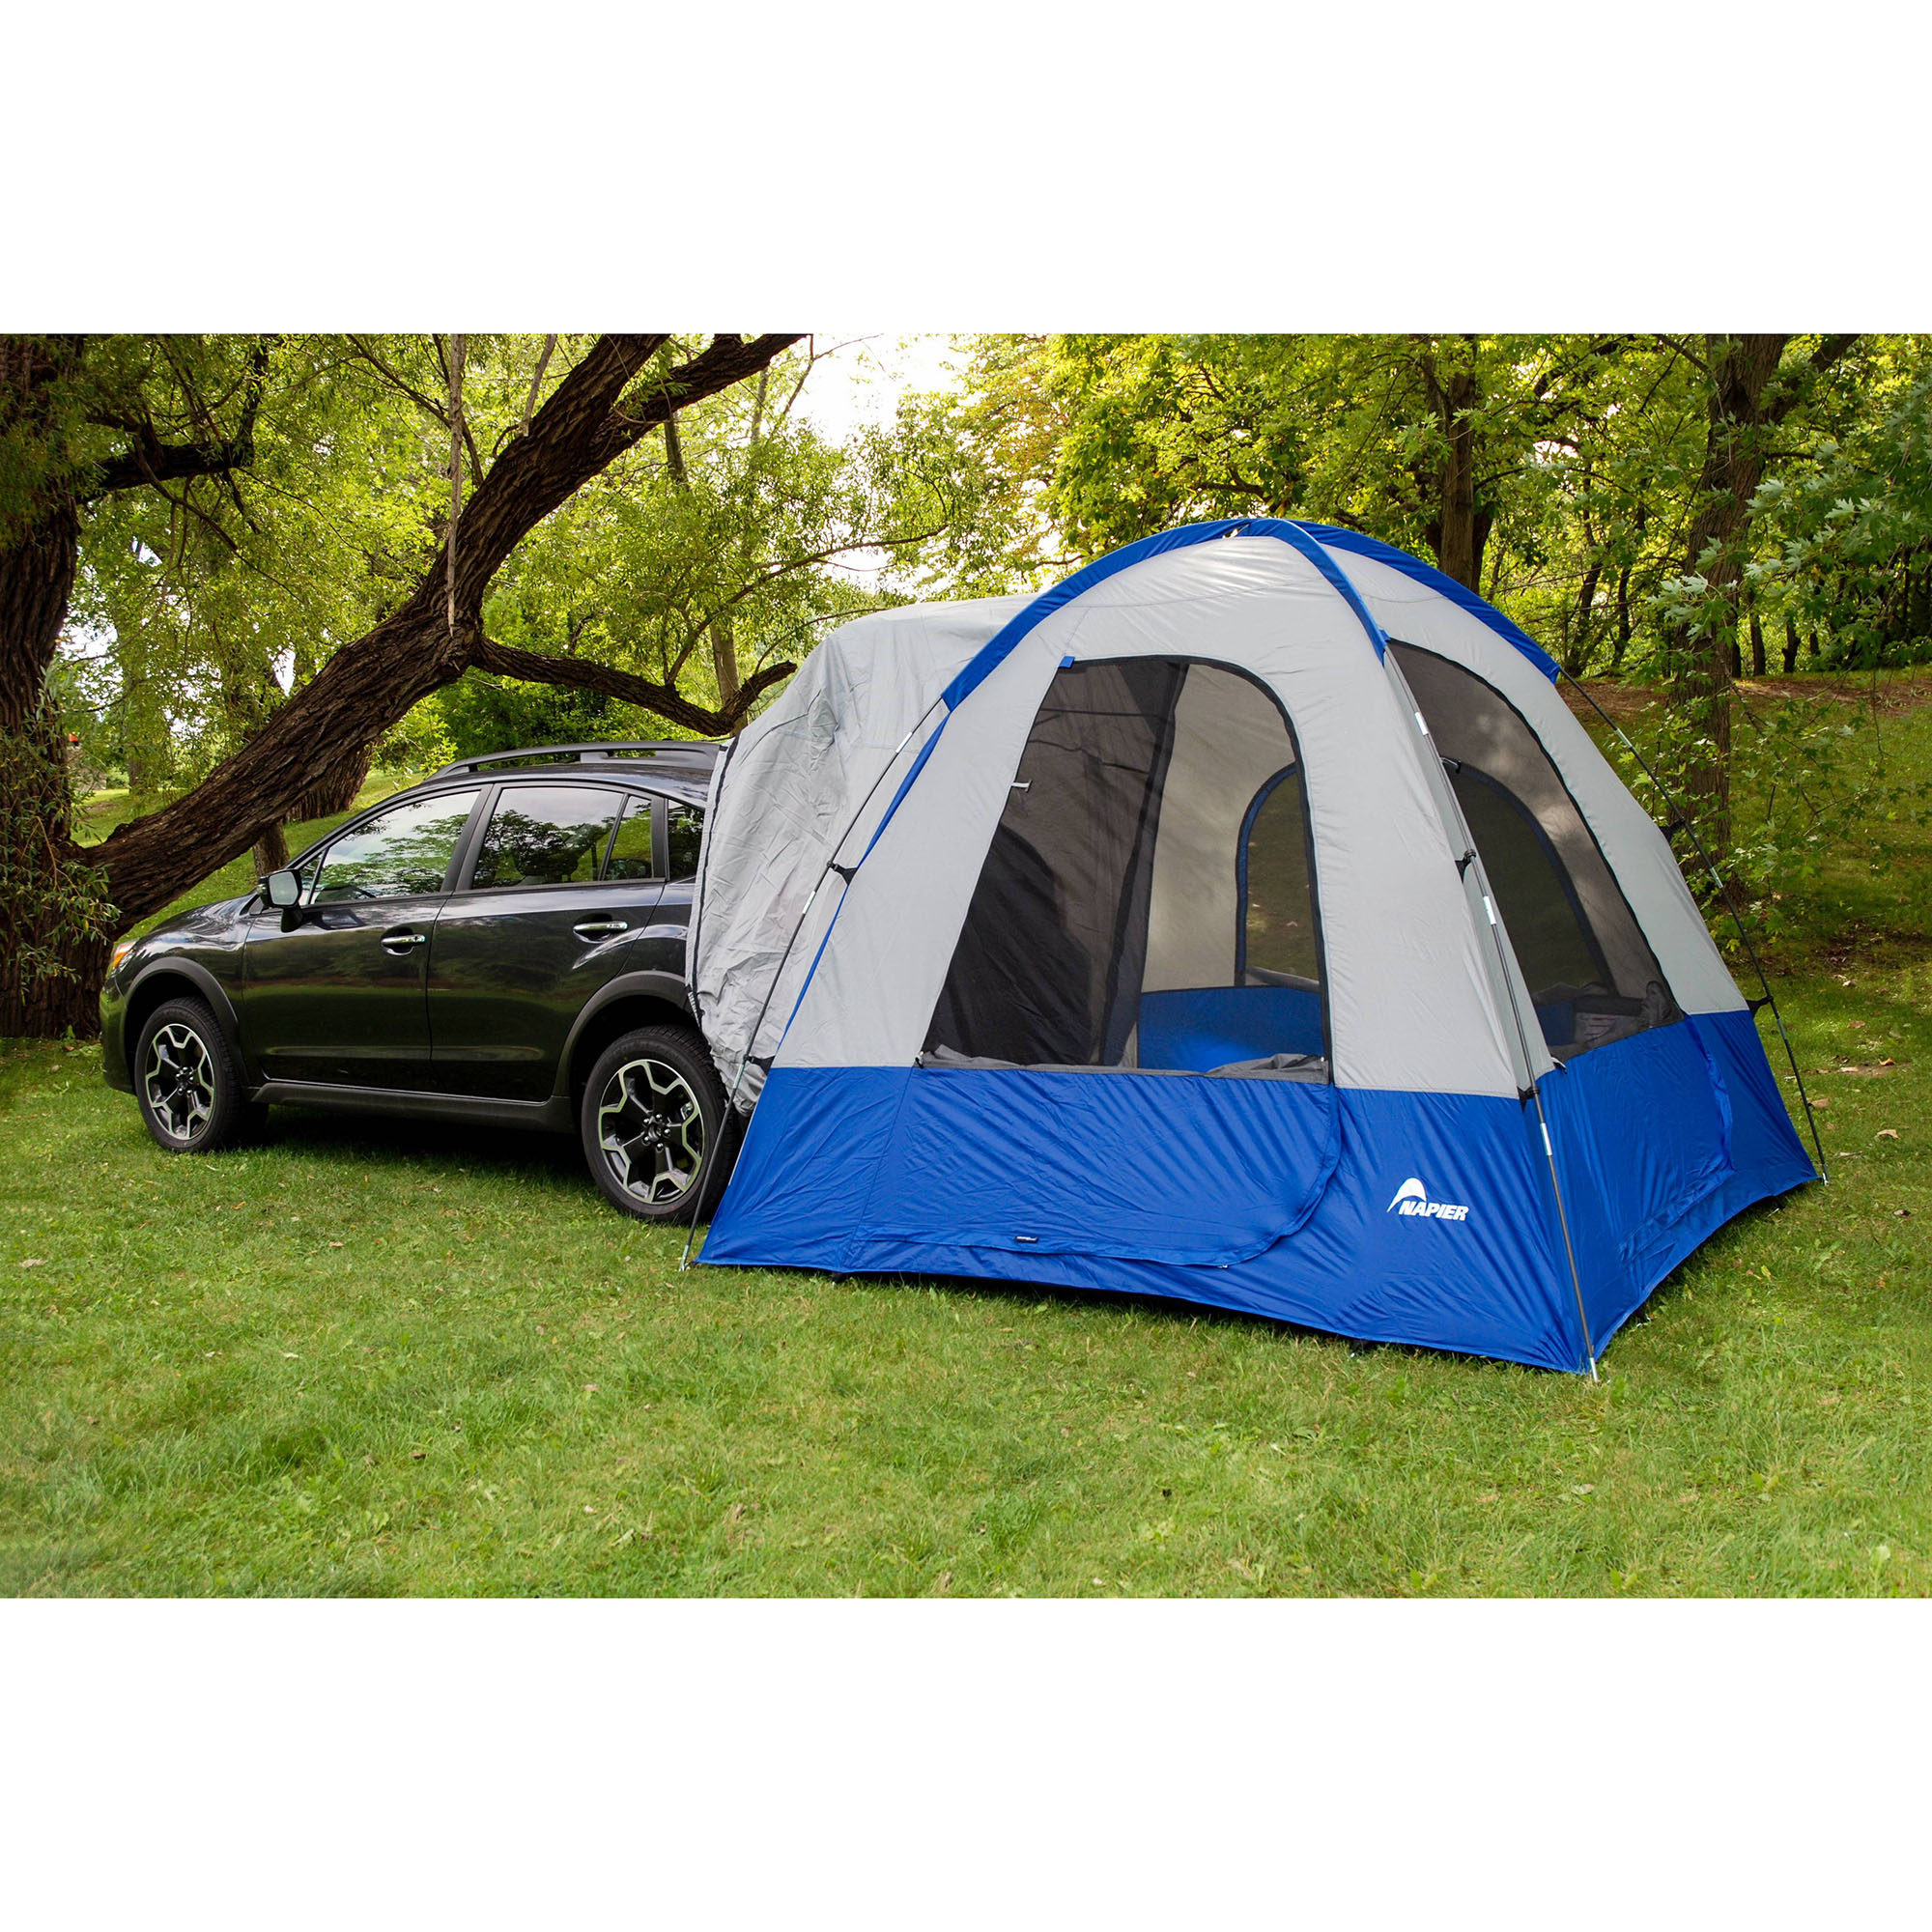 Napier Sportz Dome-To-Go Universal SUV Cargo 4 Person Camping Tent with Awning - image 3 of 7